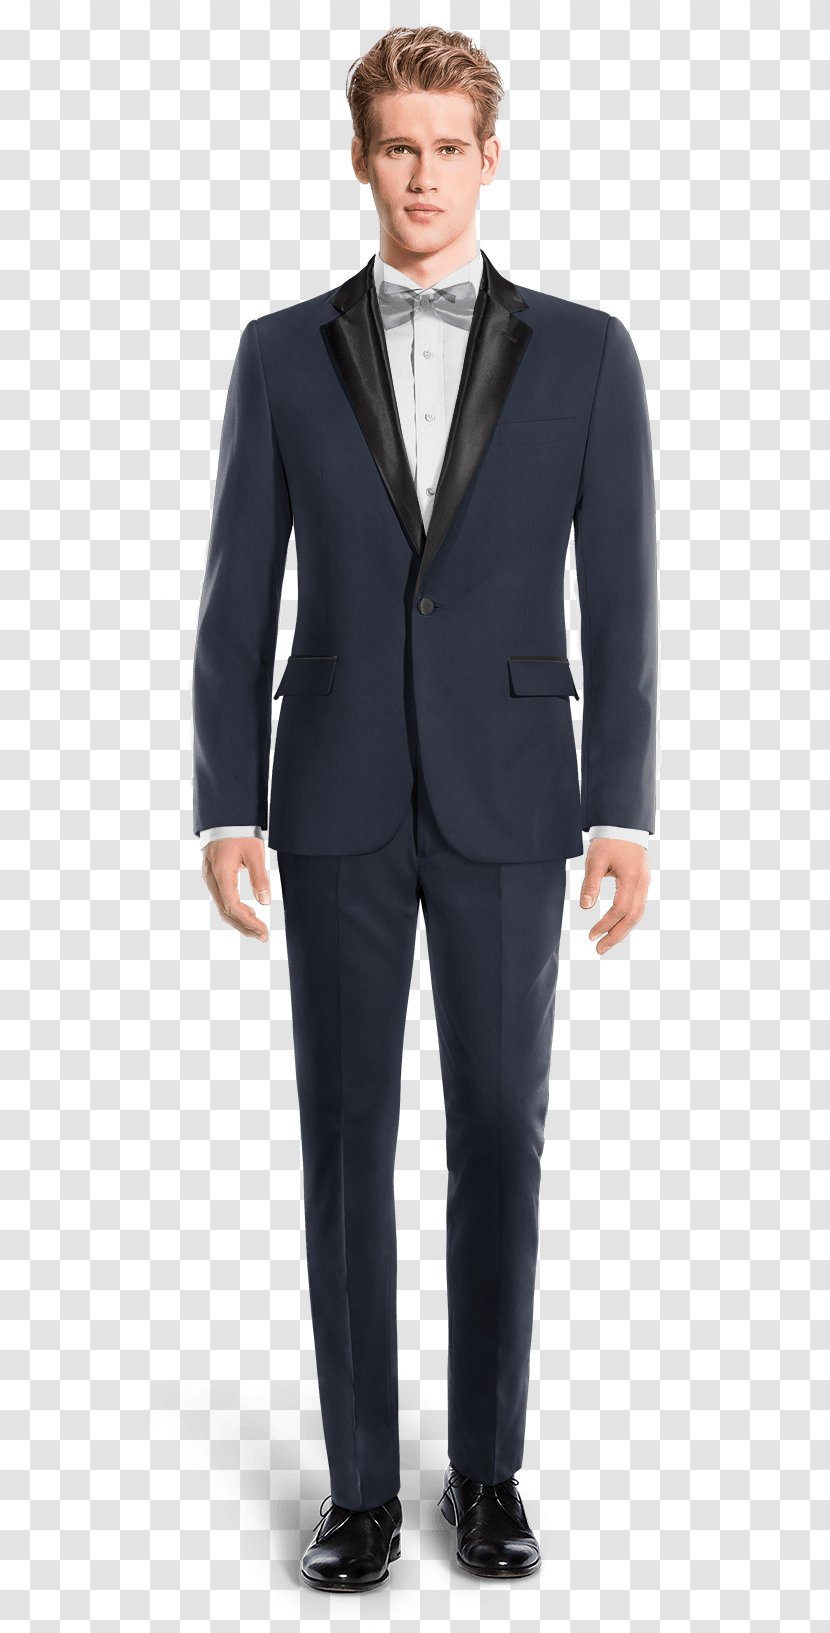 Suit Lapel Tuxedo Double-breasted Single-breasted - Standing Transparent PNG